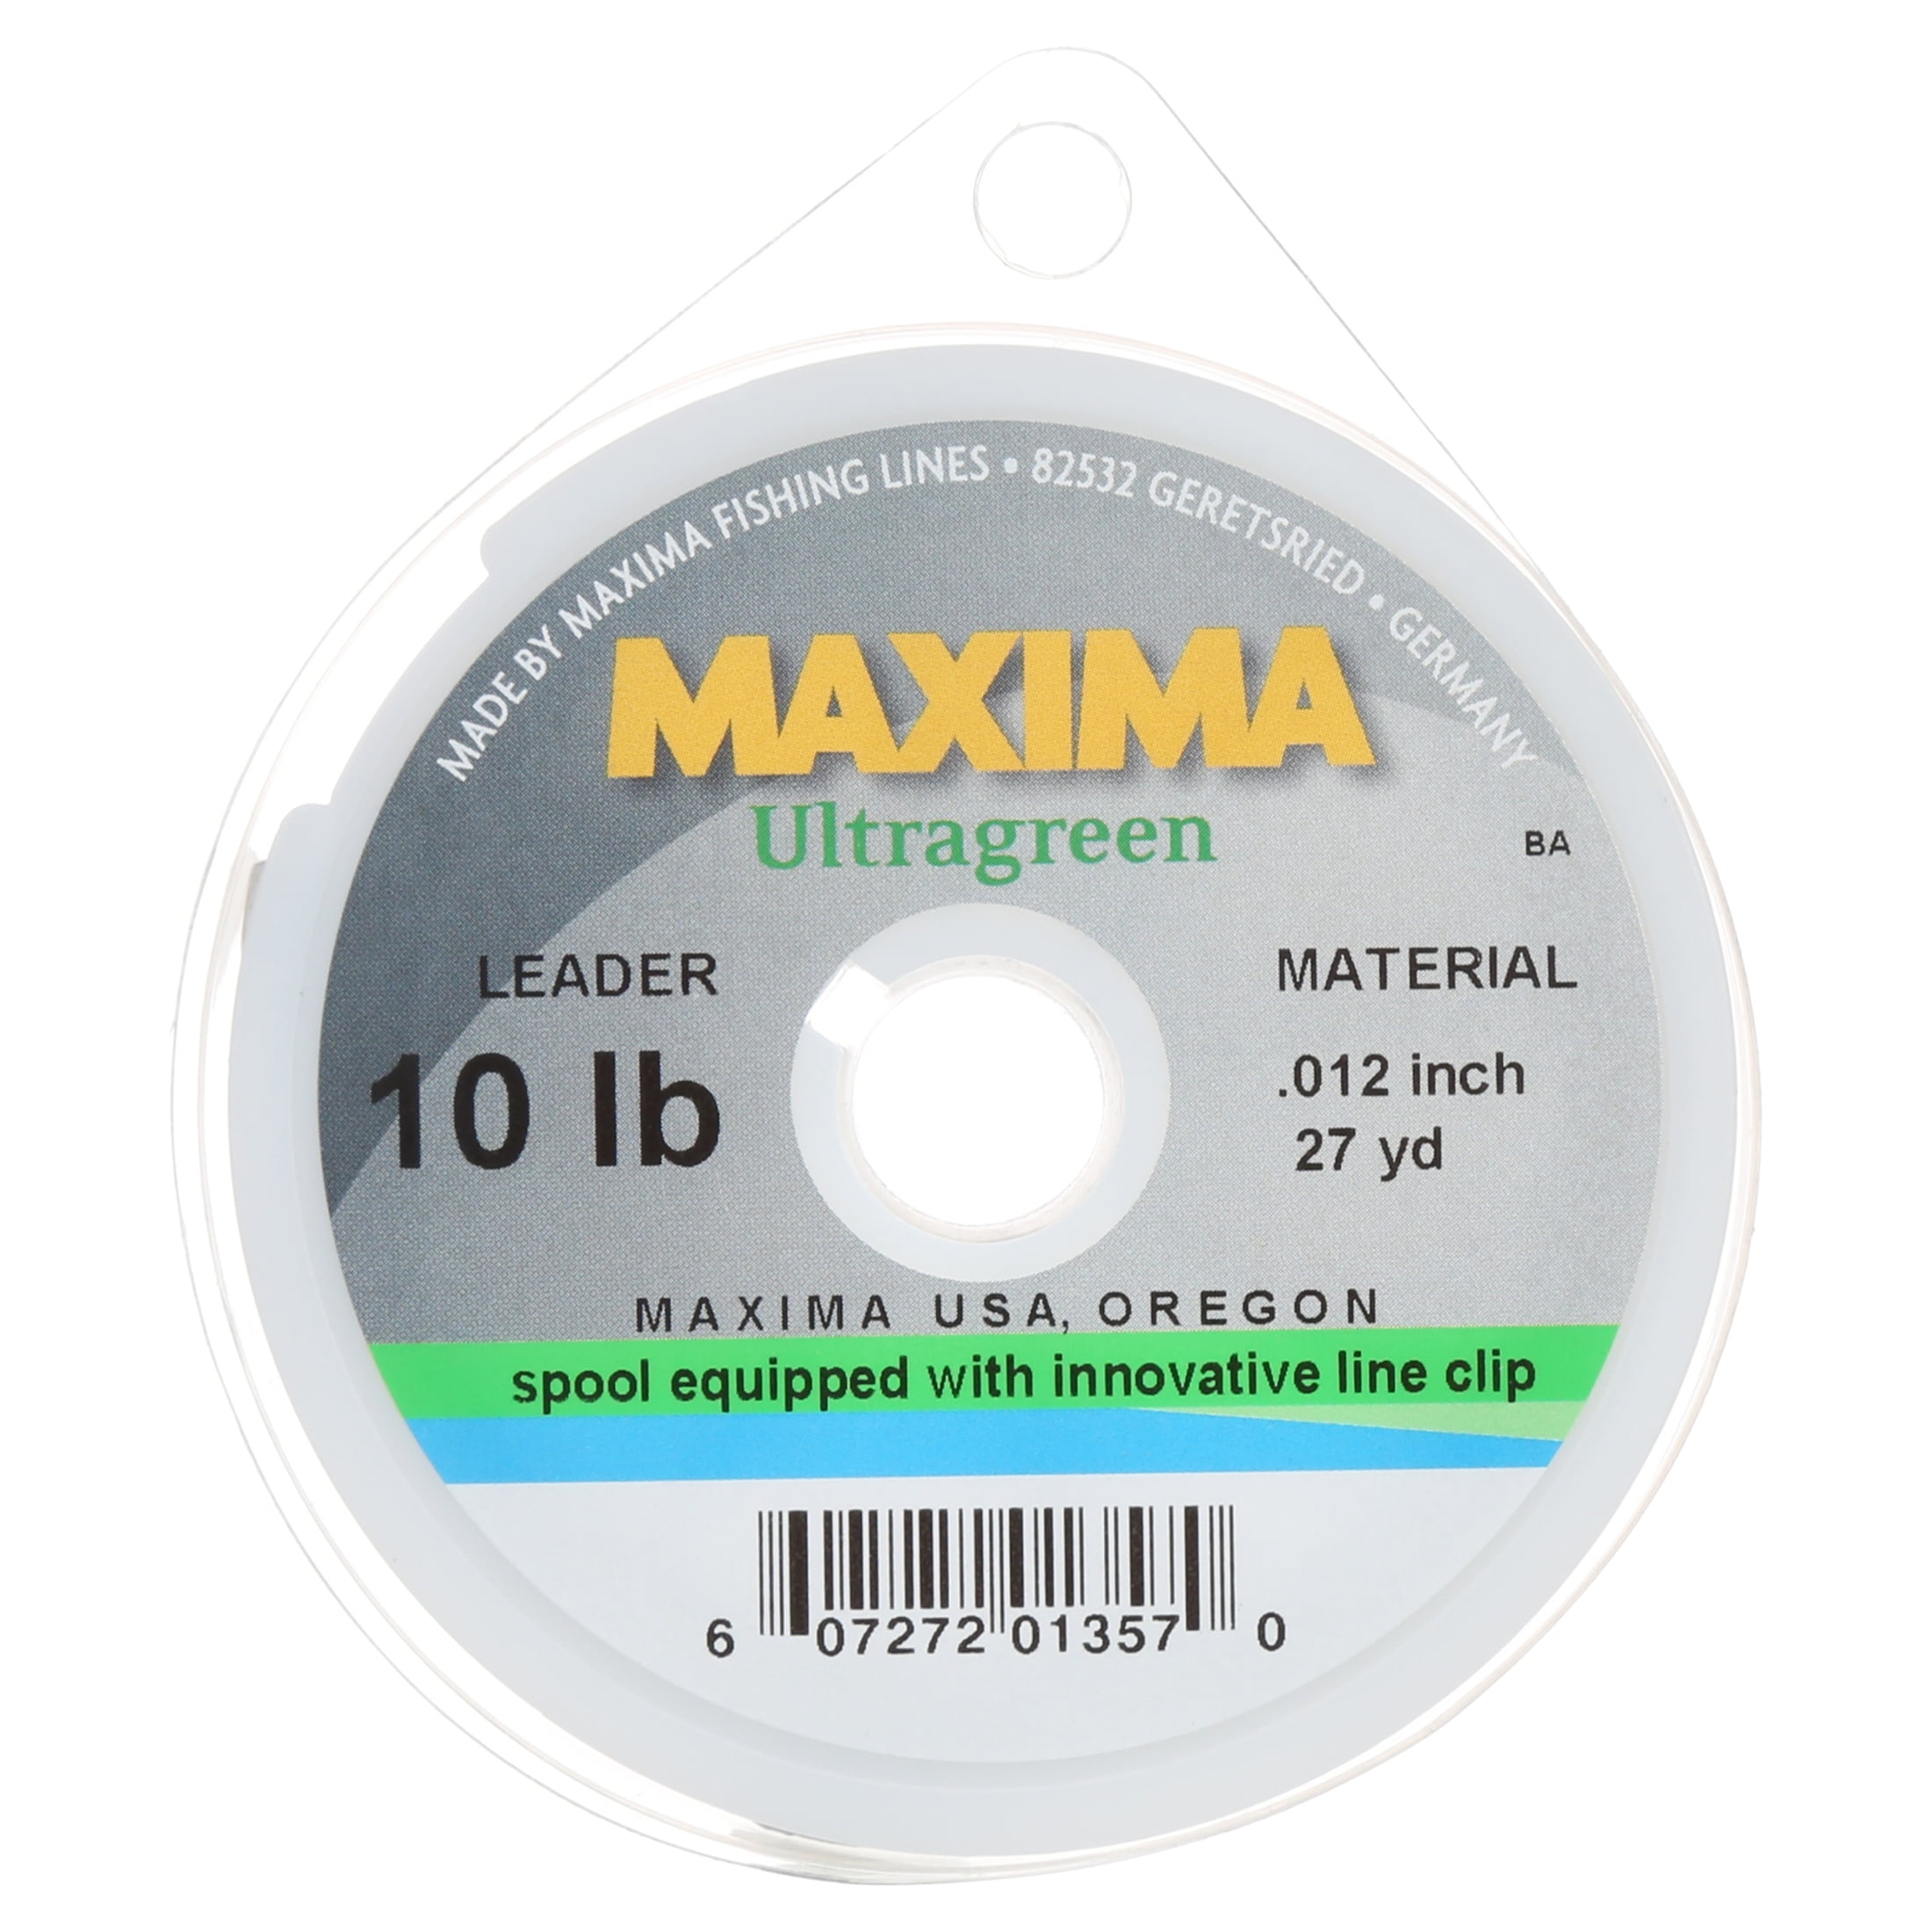 Fishing Line Review - Maxima Perfexion Fishing Line 2 pound test